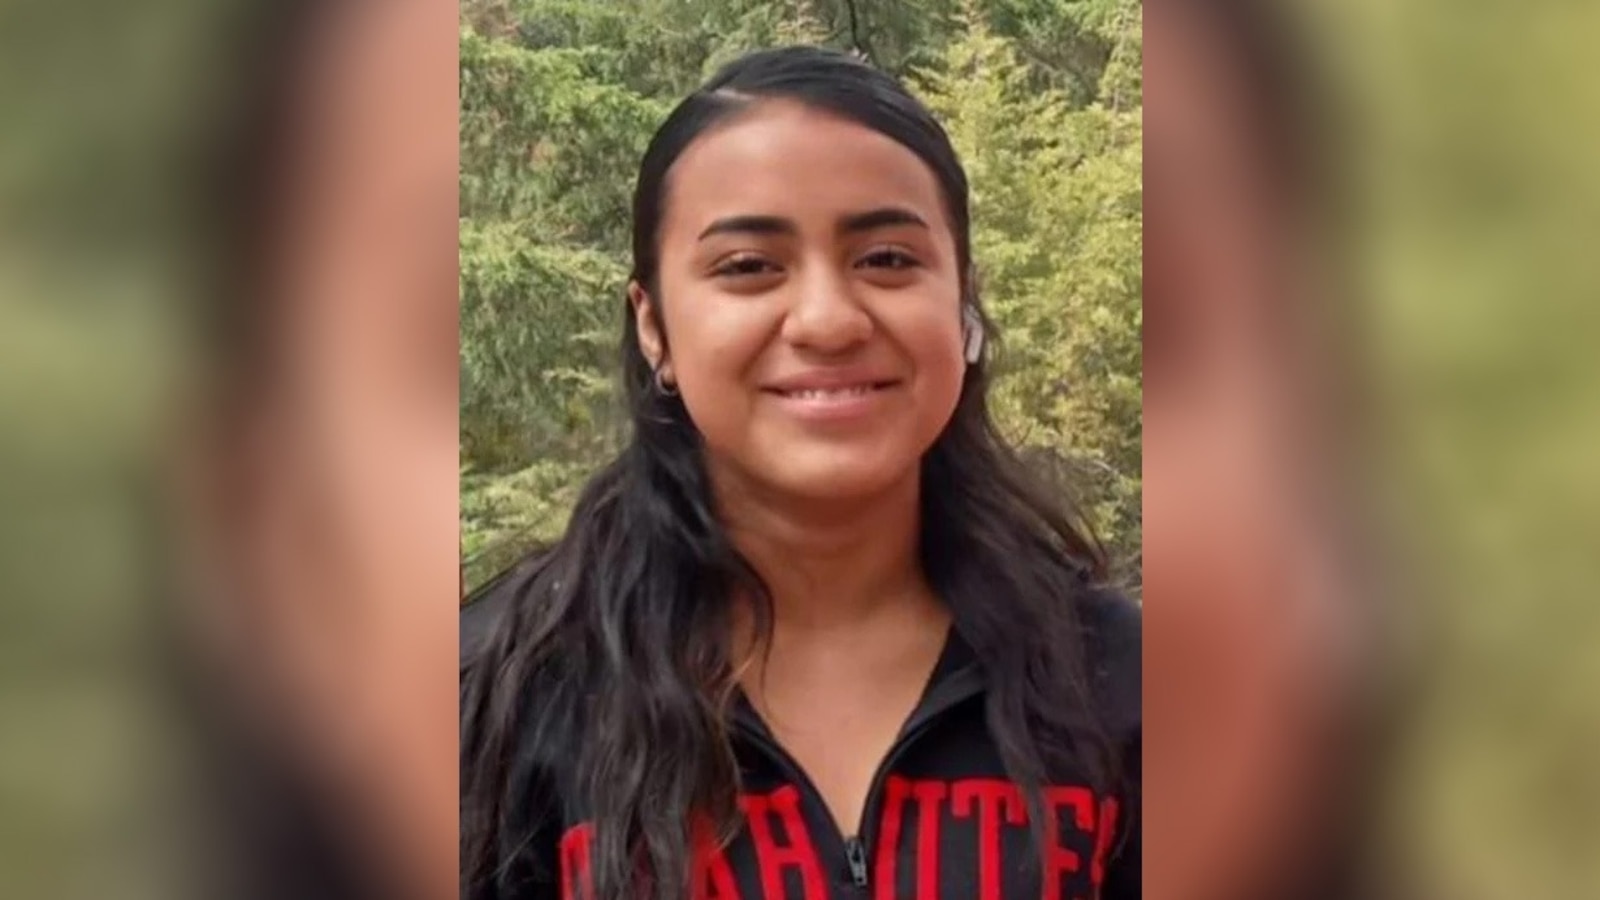 American teen, 2 cousins missing in Mexico found safe